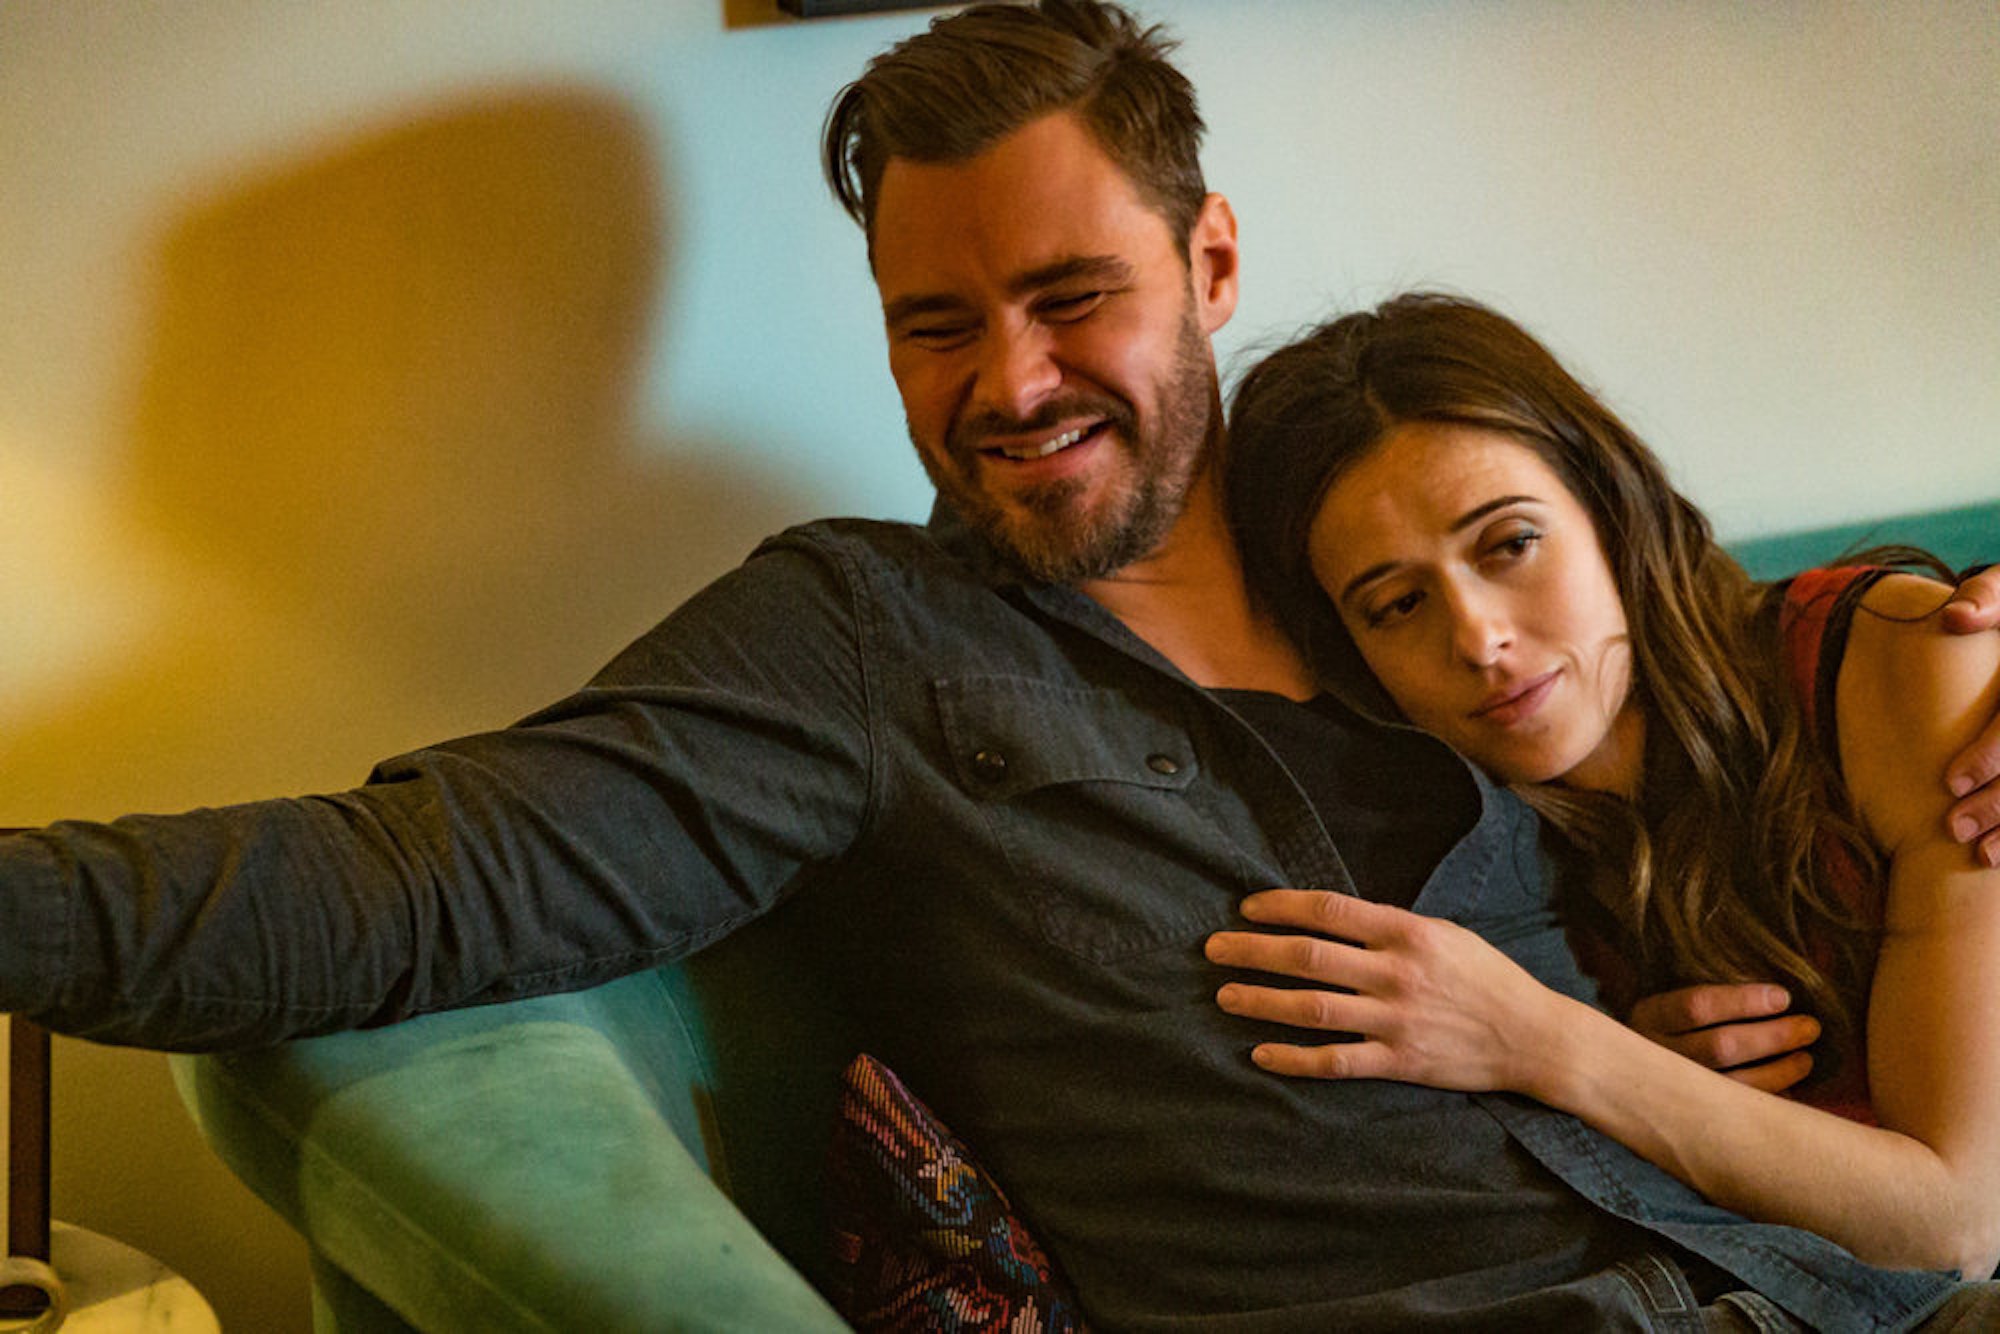 Adam Ruzek and Kim Burgess lying on a couch together in 'Chicago P.D.'